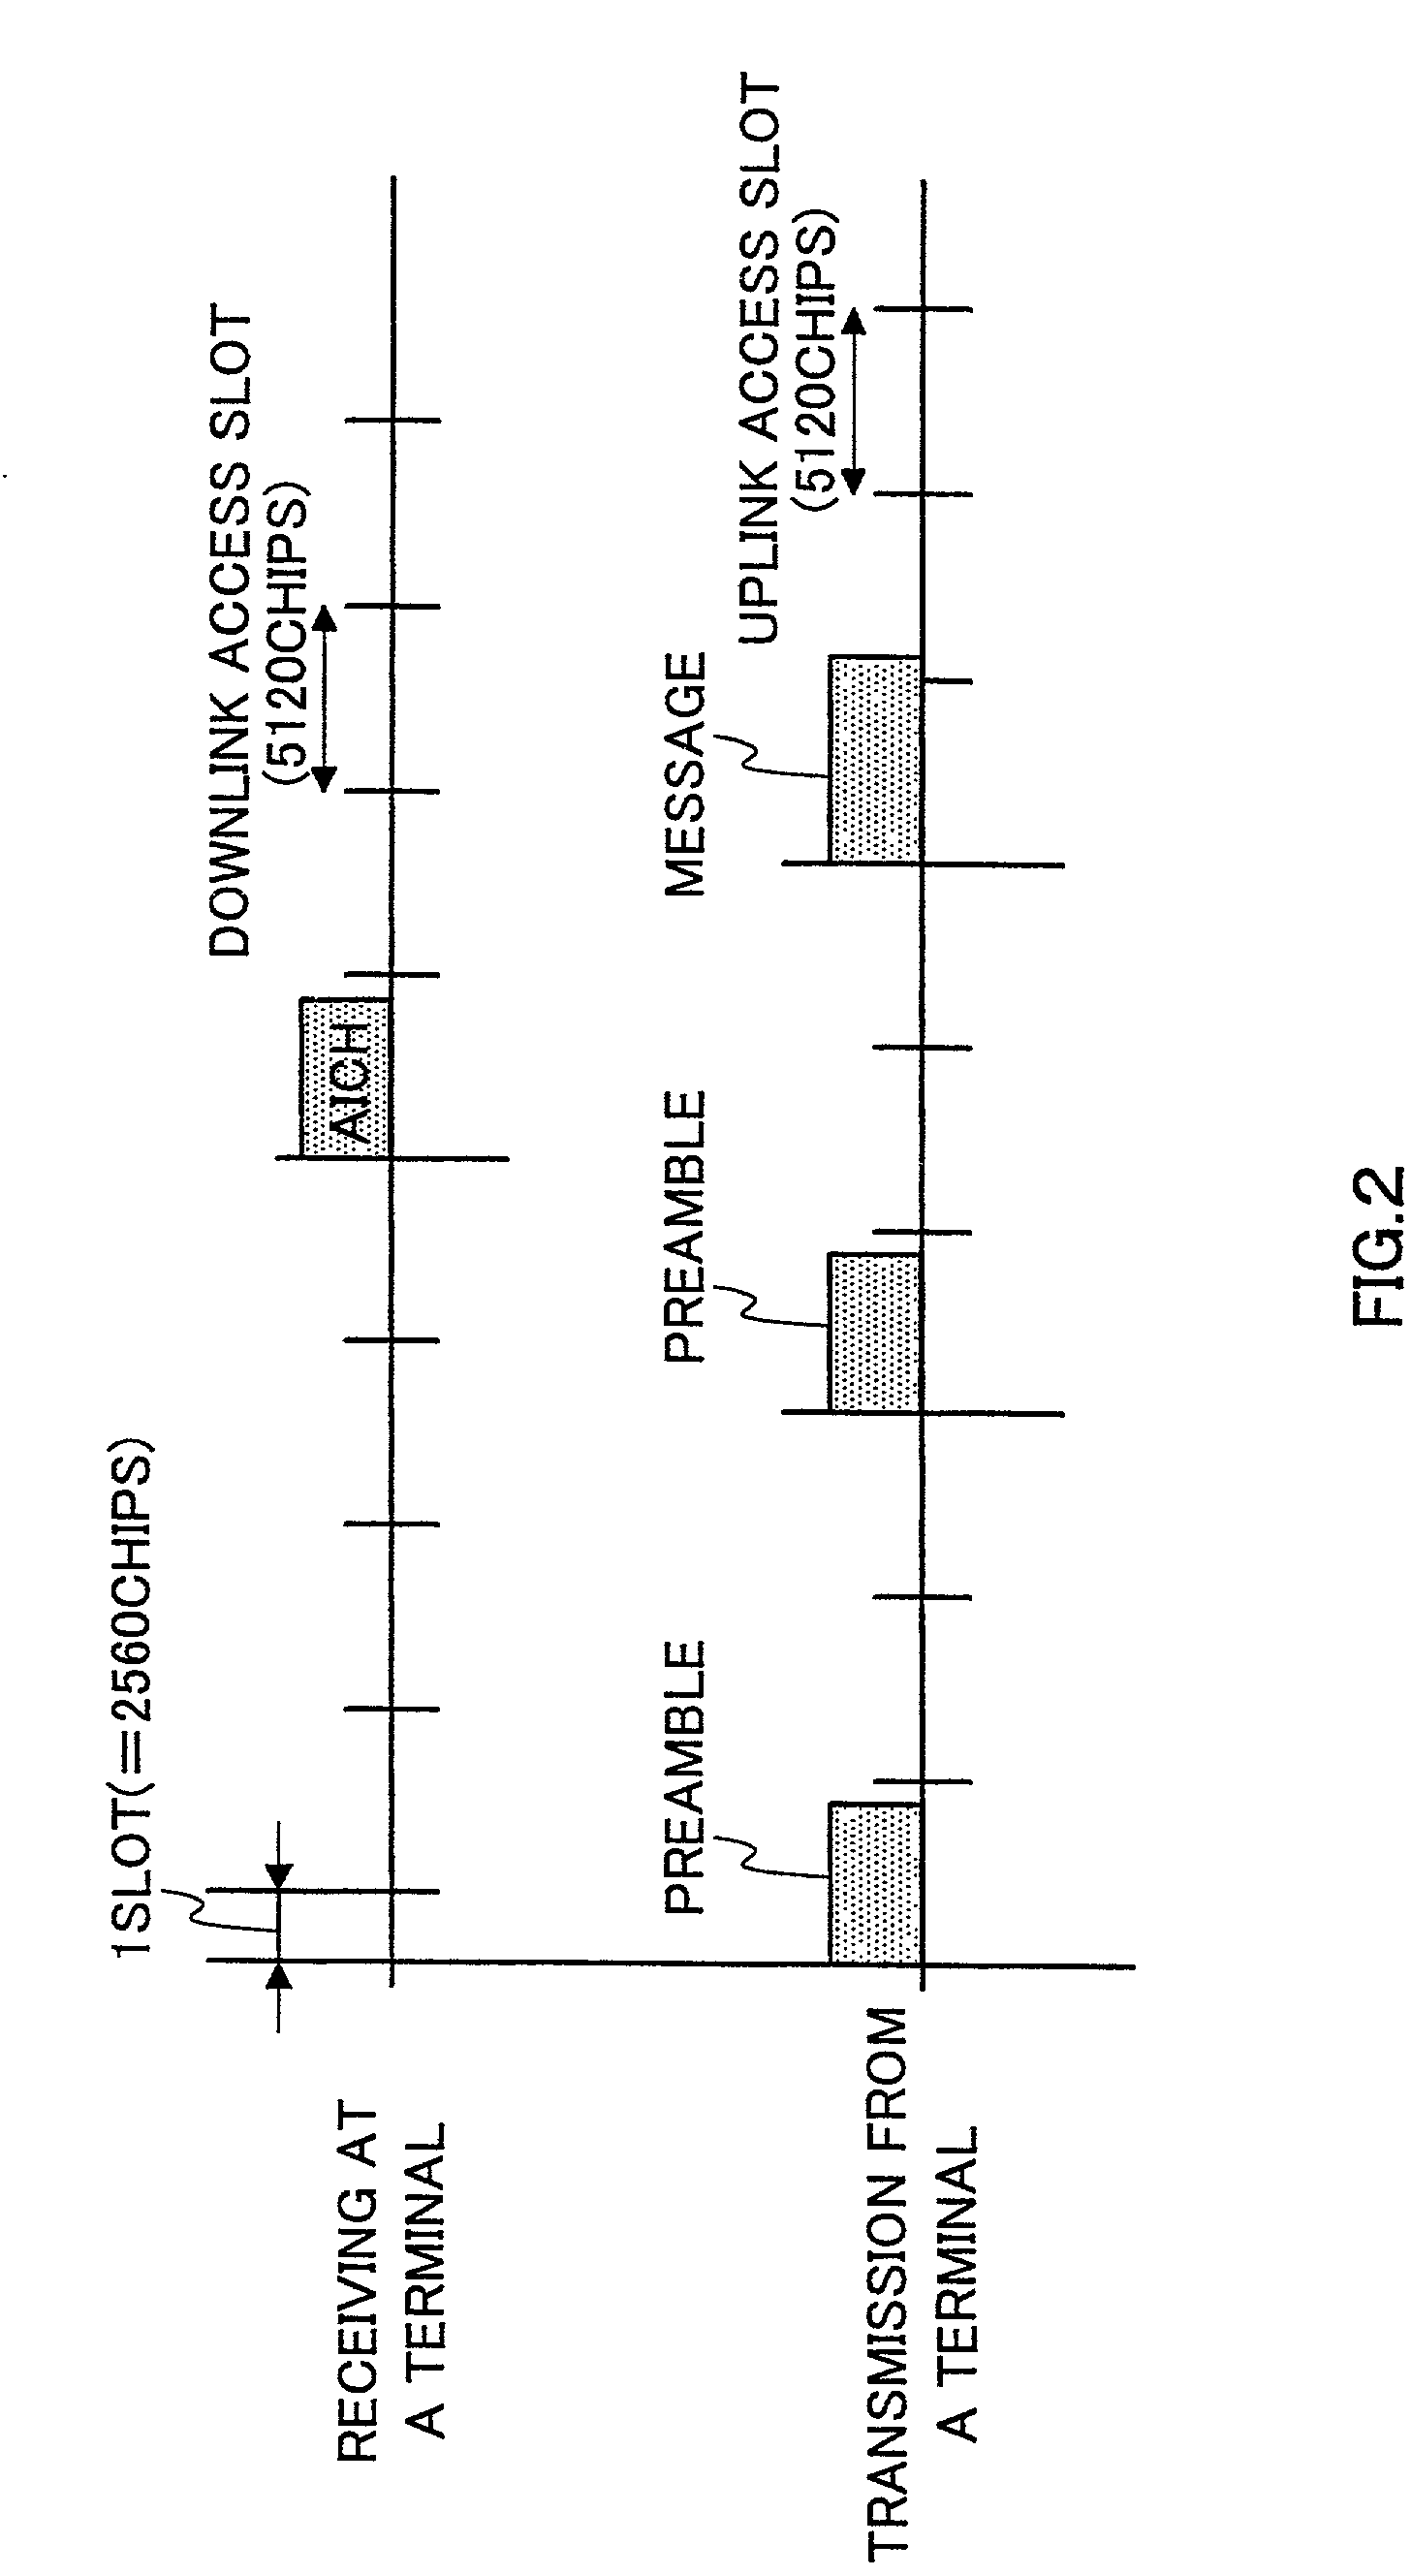 Base station apparatus and method for wireless communications